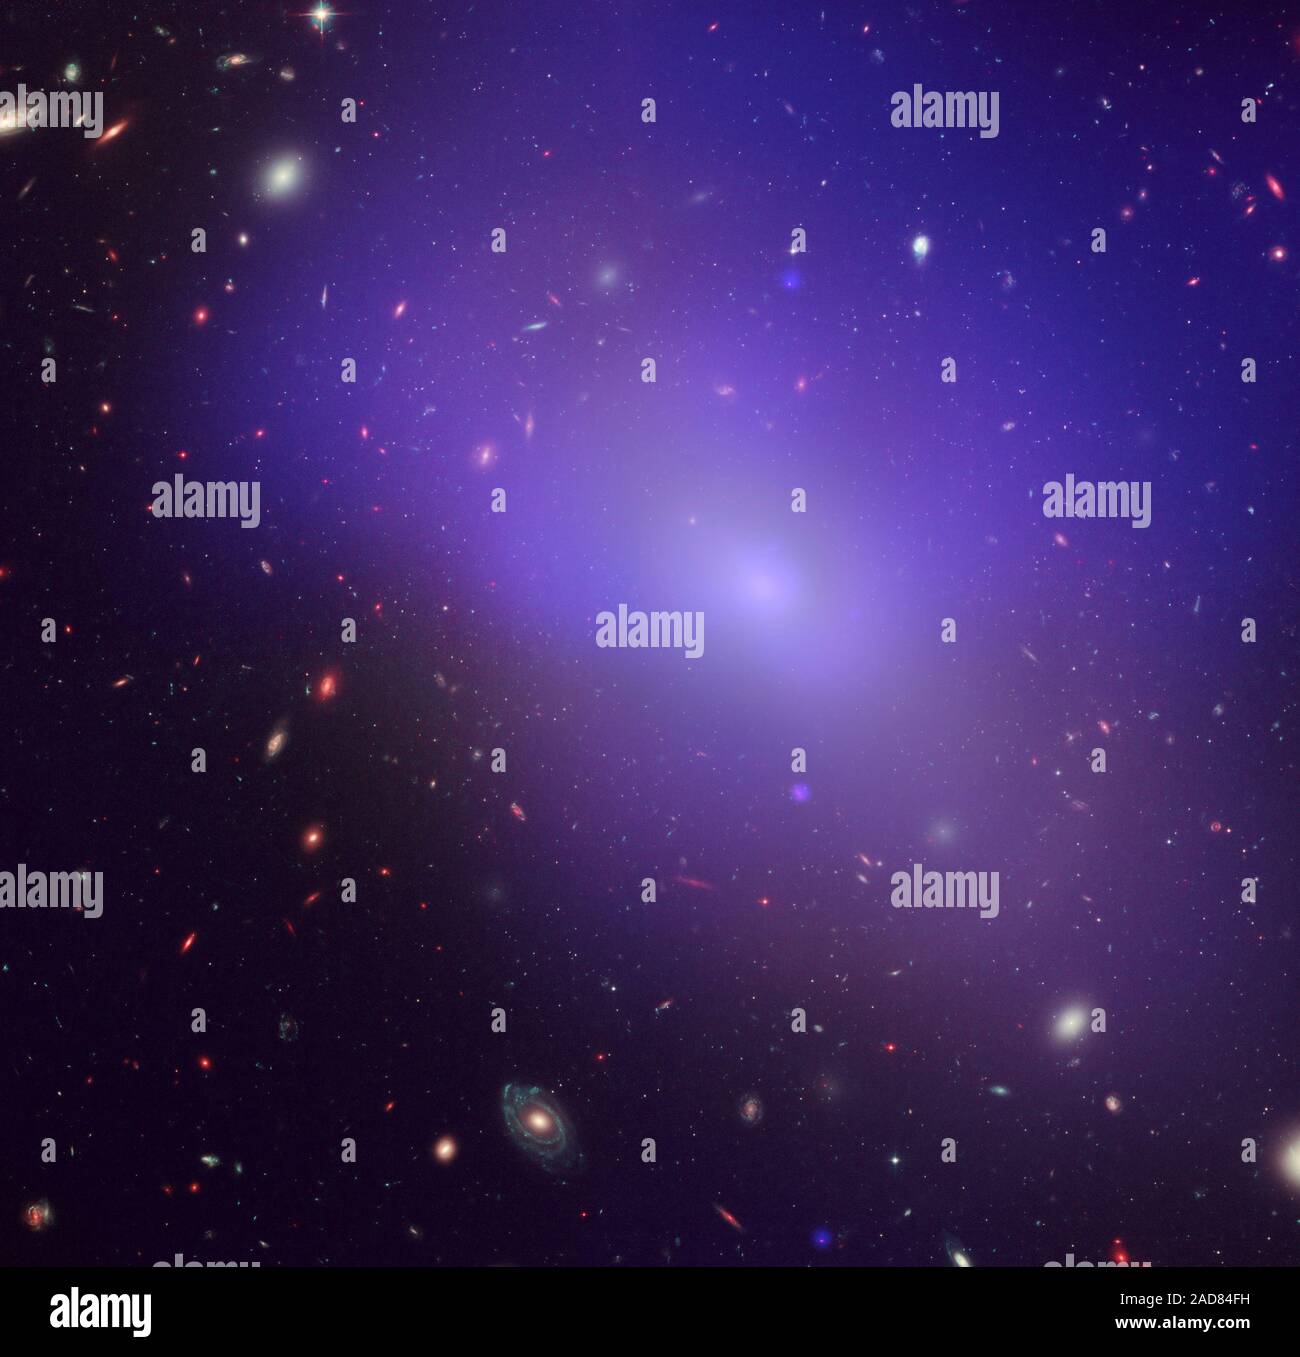 This image of the elliptical galaxy NGC 1132 combines an image from NASA's /Chandra X-Ray Observatory/ obtained in 2004 with images from the /Hubble Space Telescope/ made in 2005 and 2006 in green and near-infrared light. The blue/purple in the image is the X-ray glow from hot, diffuse gas. The giant foreground galaxy, numerous dwarf galaxies in its neighborhood, and many much more distant galaxies in the background are seen in visible light.   Object Name: NGC 1132    Image Type: Astronomical    Credit: NASA, ESA, M. West (ESO, Chile), and CXC/Penn State University/G. Garmire, et al. Stock Photo